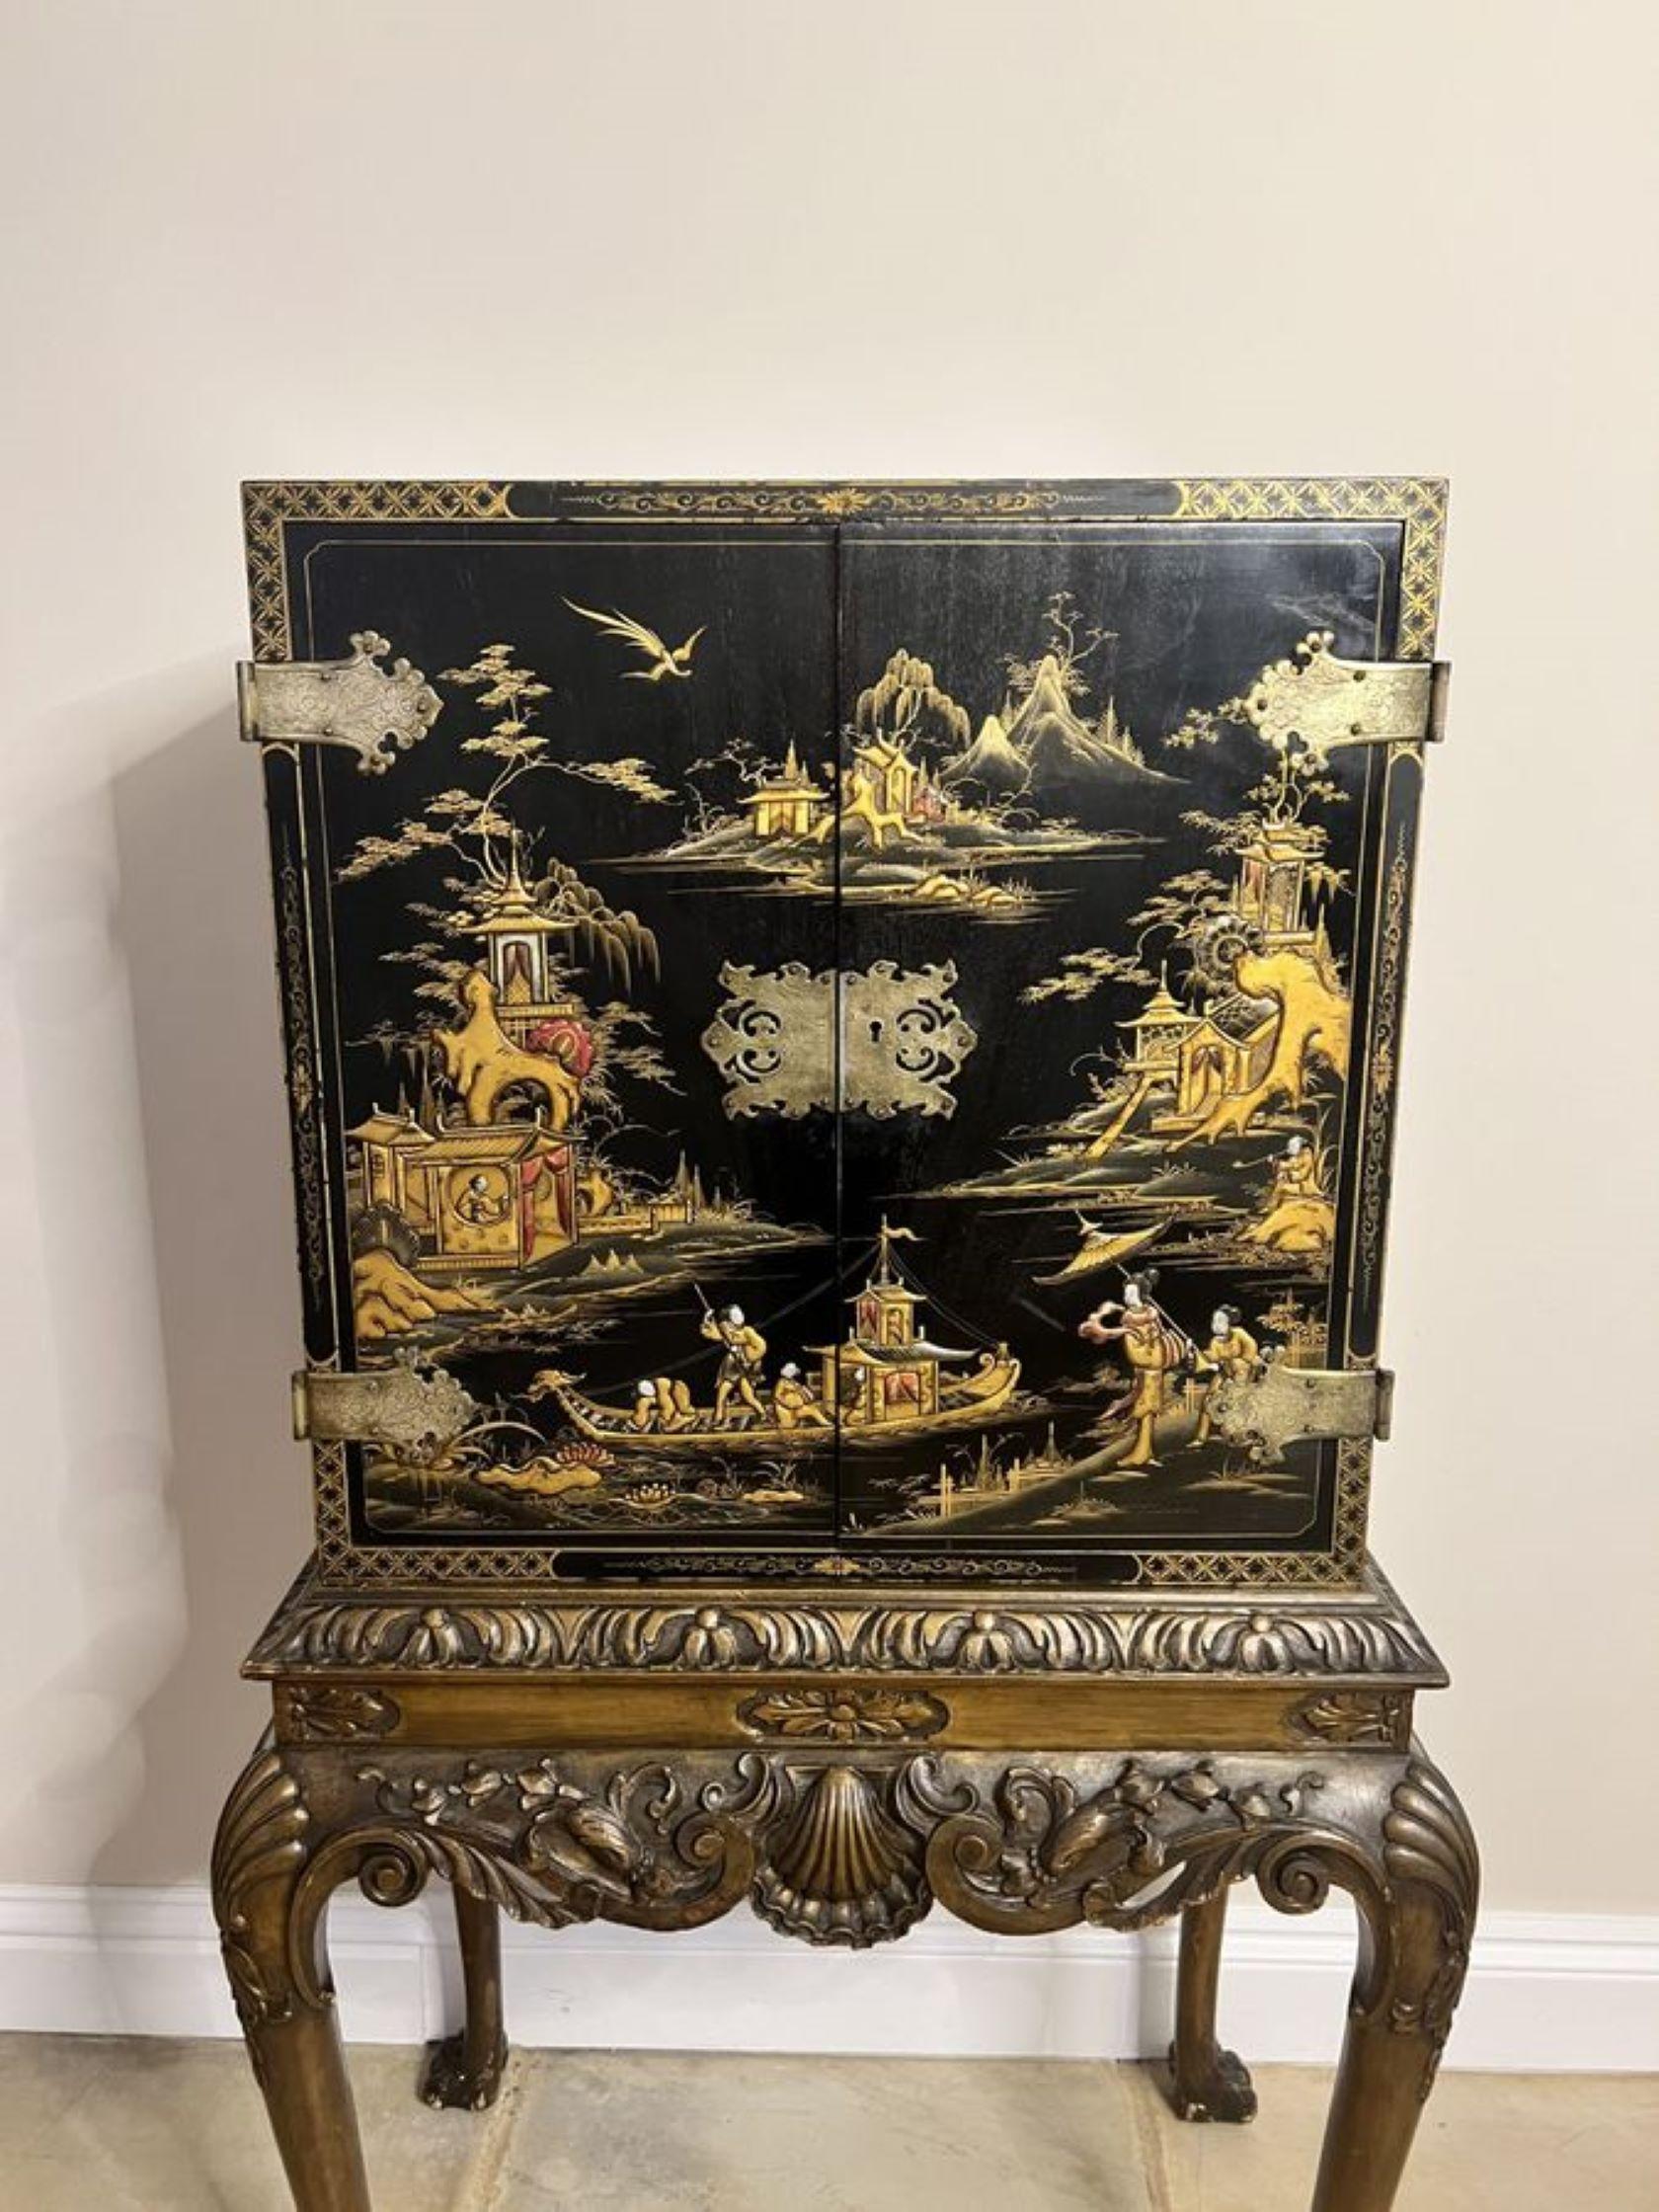 20th Century Outstanding quality antique Edwardian chinoiserie decorated cabinet on a stand